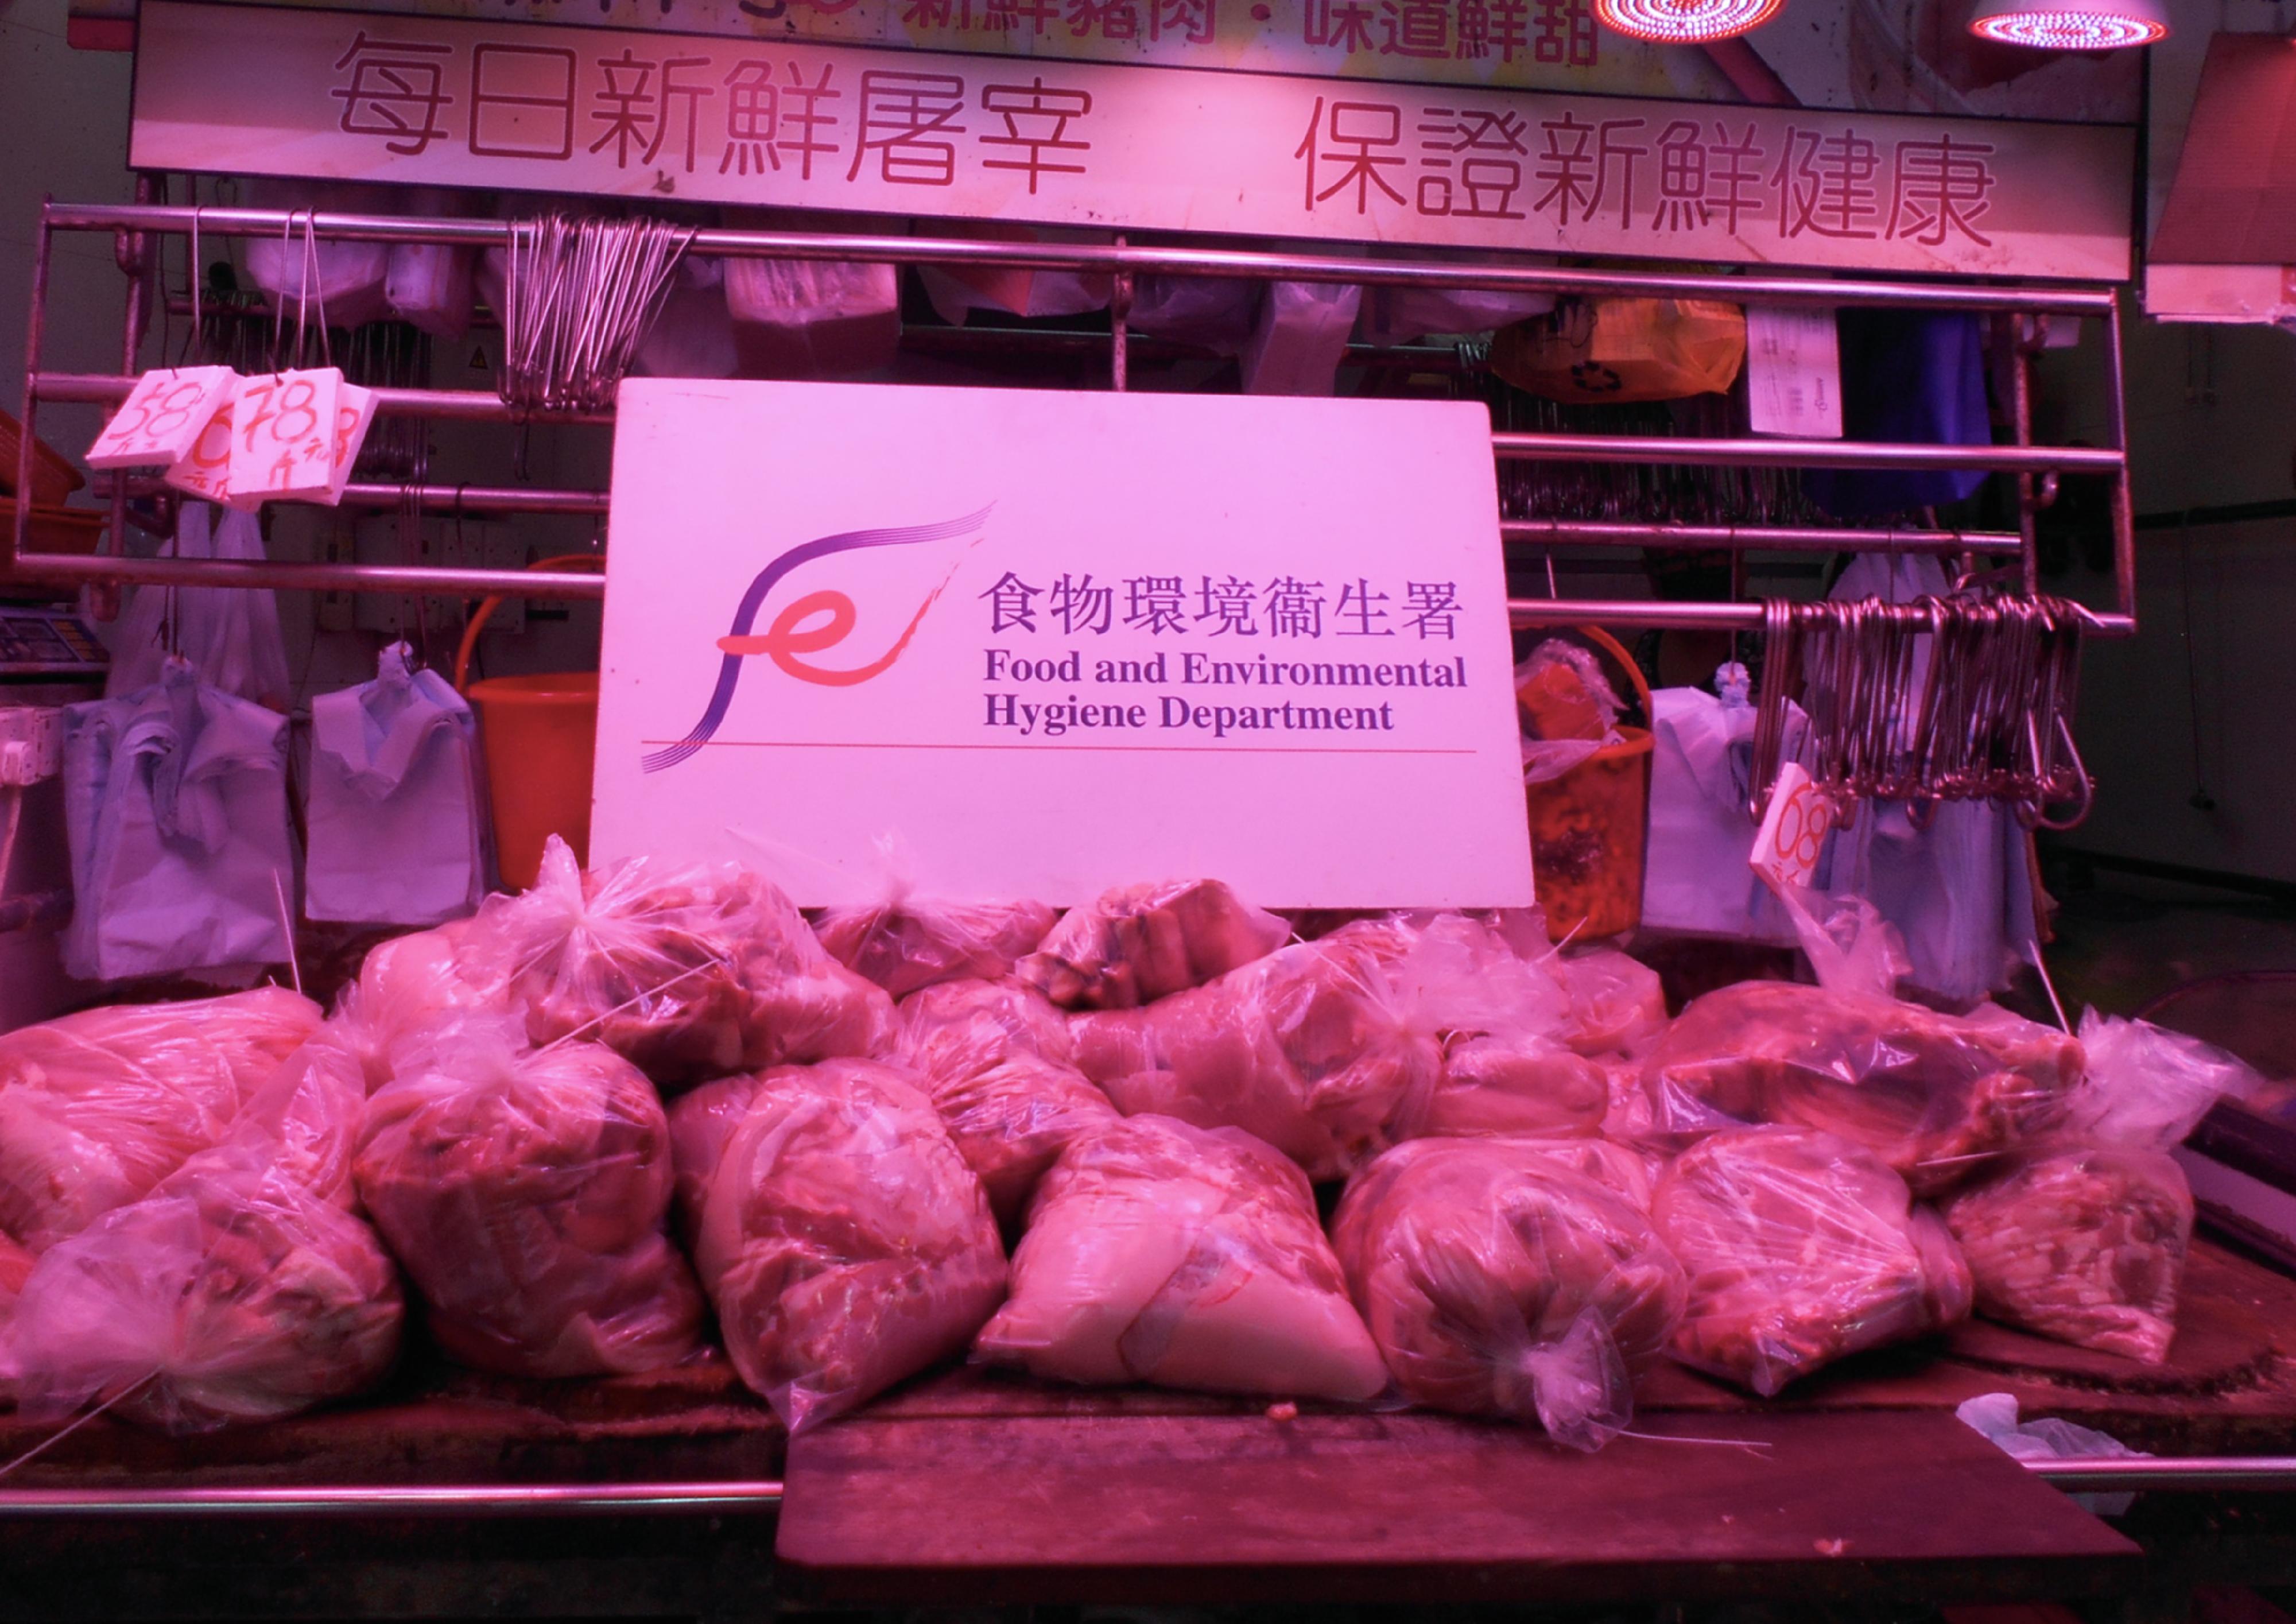 The Food and Environmental Hygiene Department (FEHD) today (July 14) raided one licensed fresh provision shop (FPS) and one unlicensed FPS in Sai Kung District suspected of selling chilled meat as fresh meat. Photo shows some of the meat seized by FEHD officers during the operation.